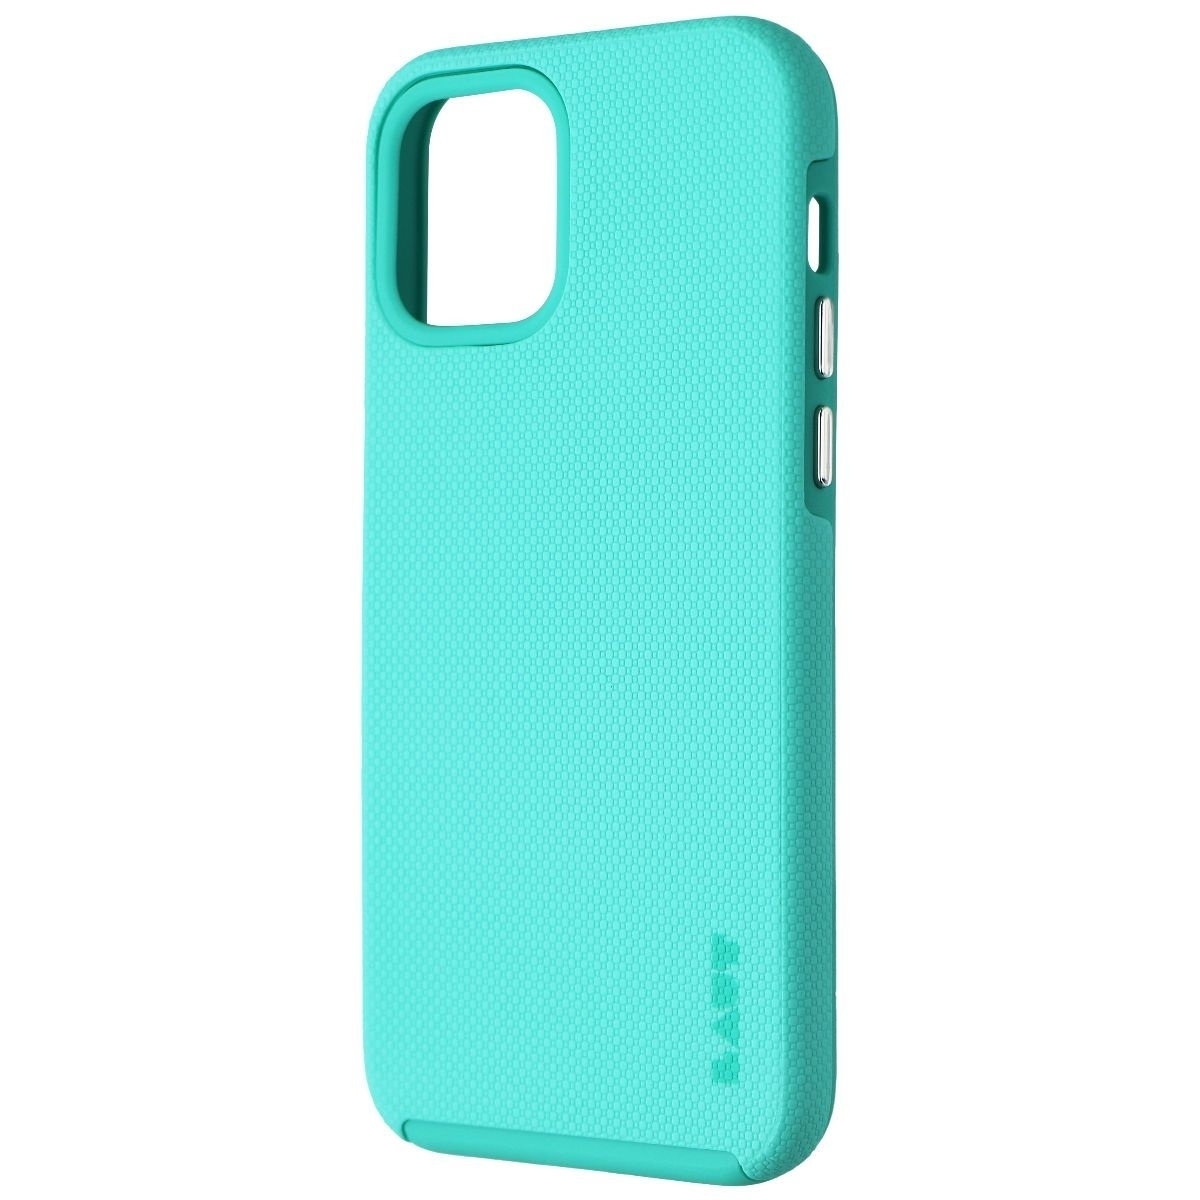 LAUT Shield Series Dual Layer Case For IPhone 12 And IPhone 12 Pro - Mint Teal